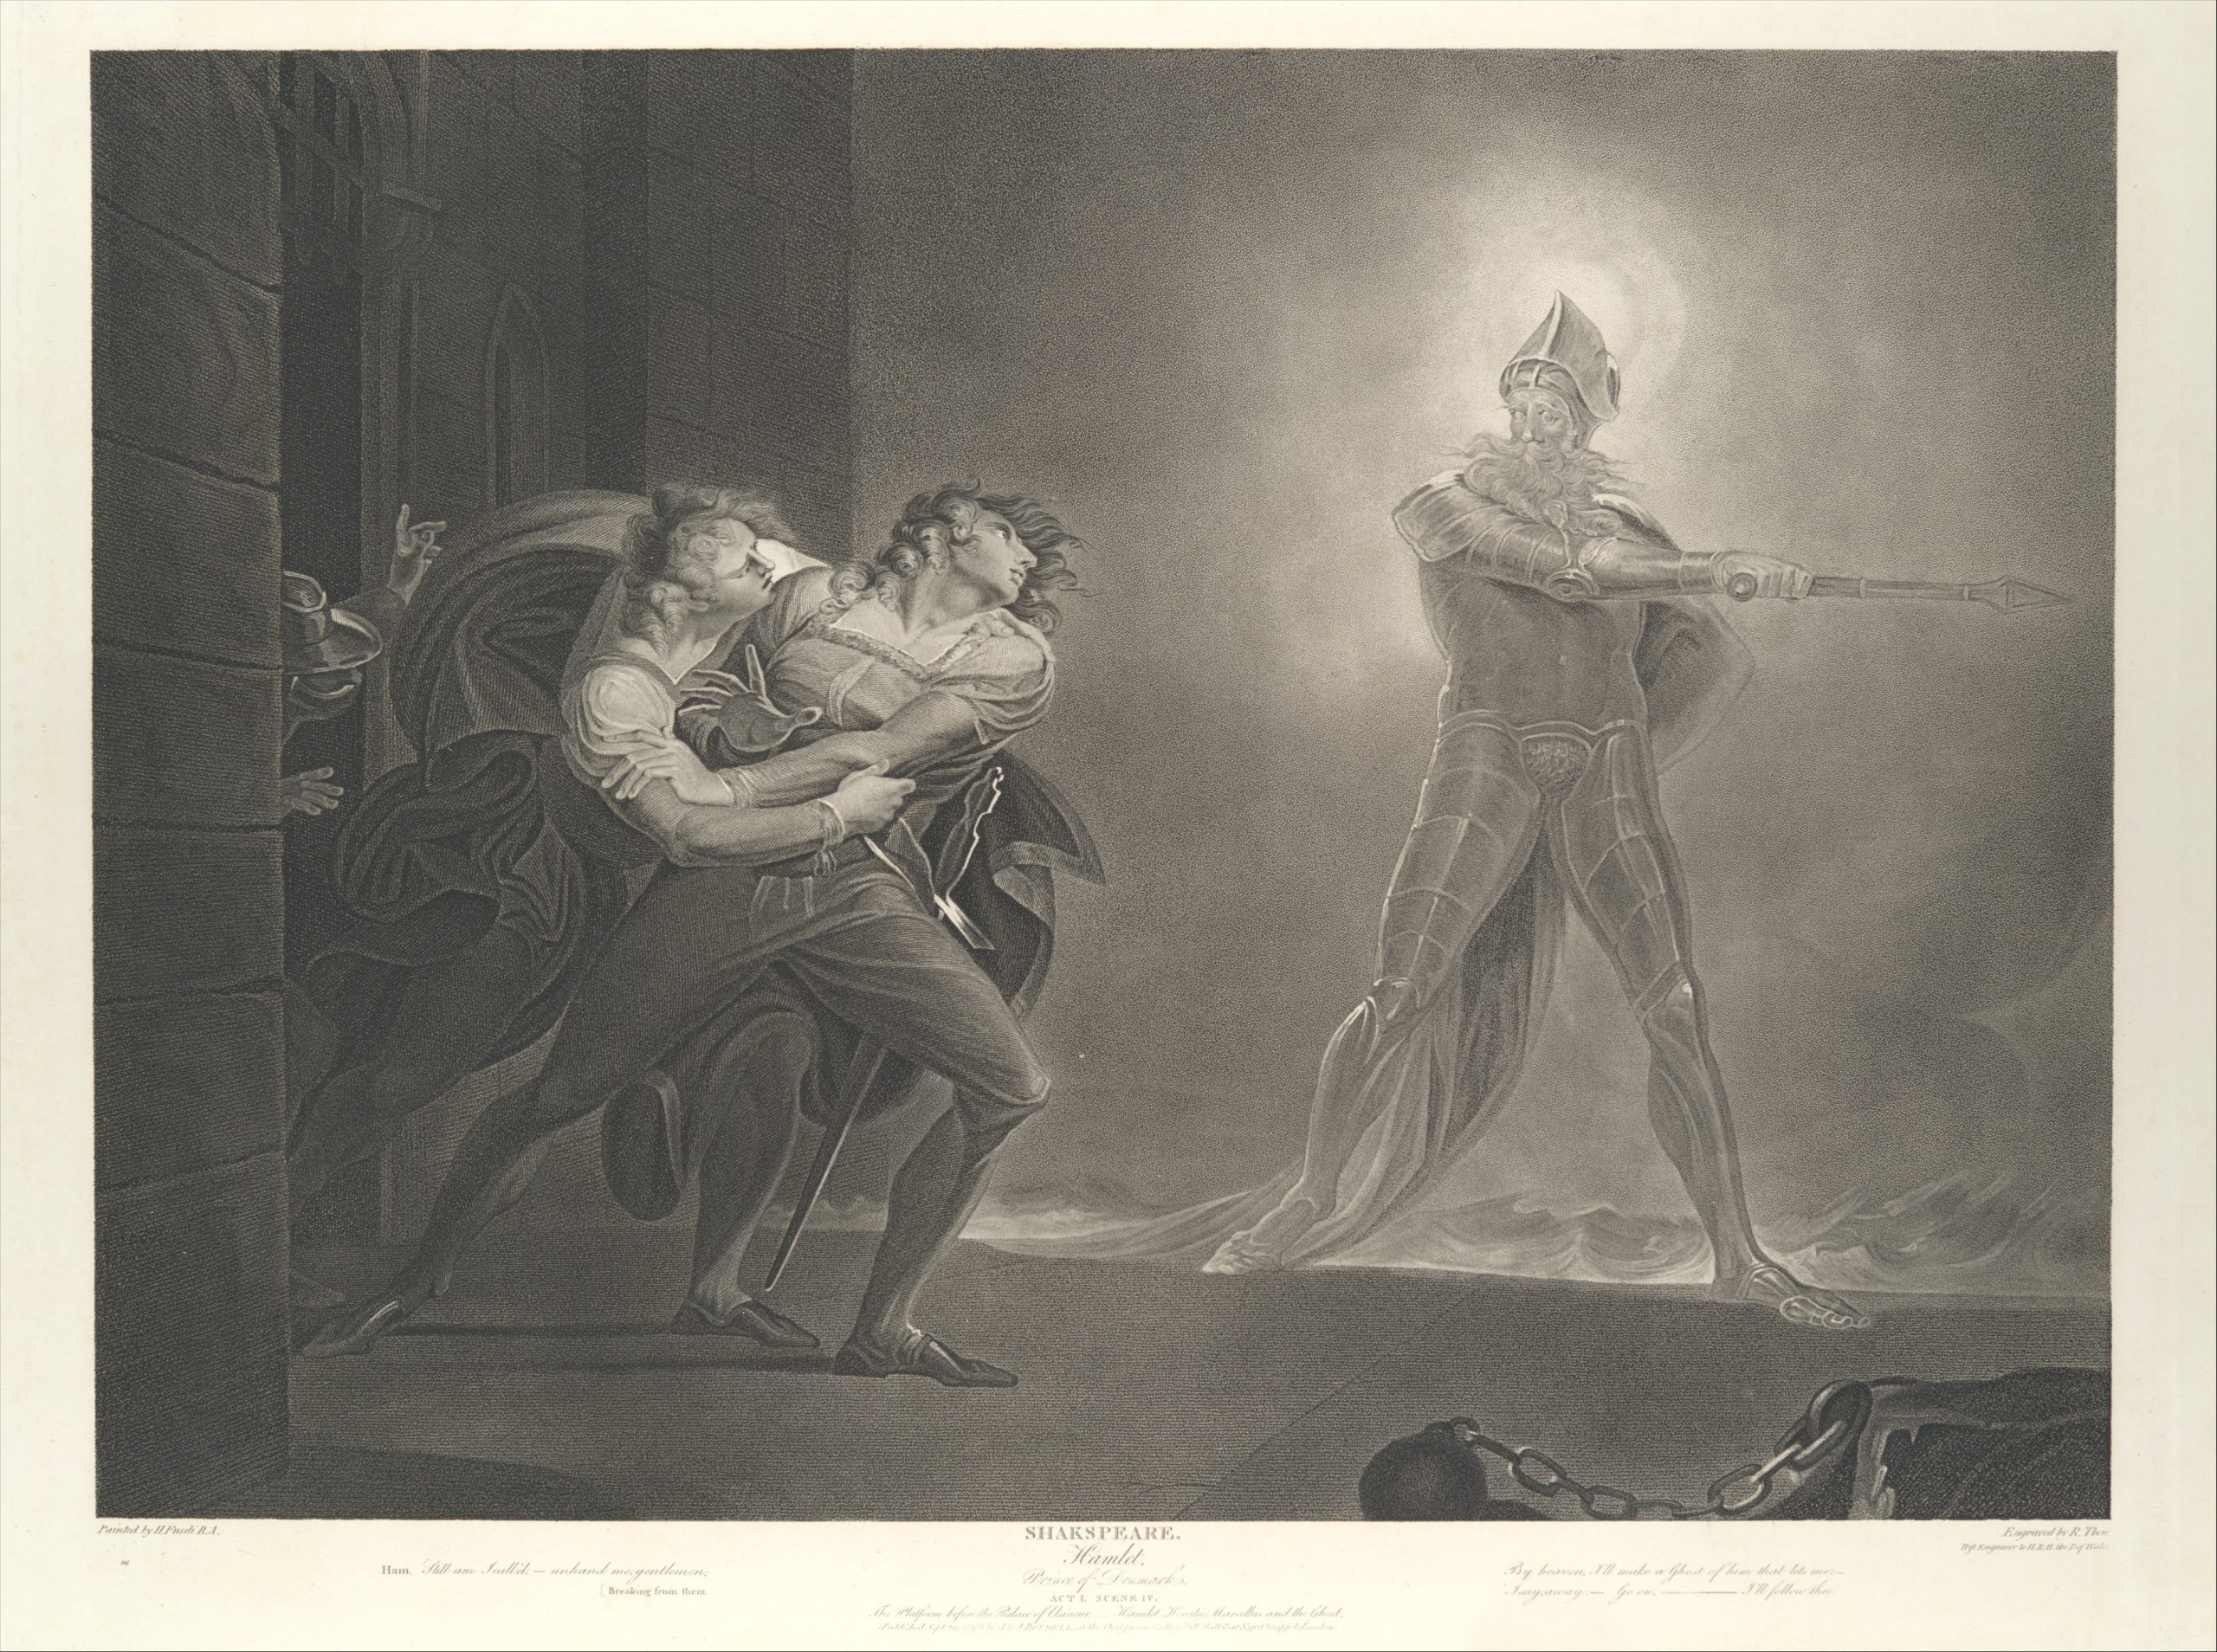 A scene depicts a fight between two men as they are met with the glowing figure of a man who stands with a spear towards them.